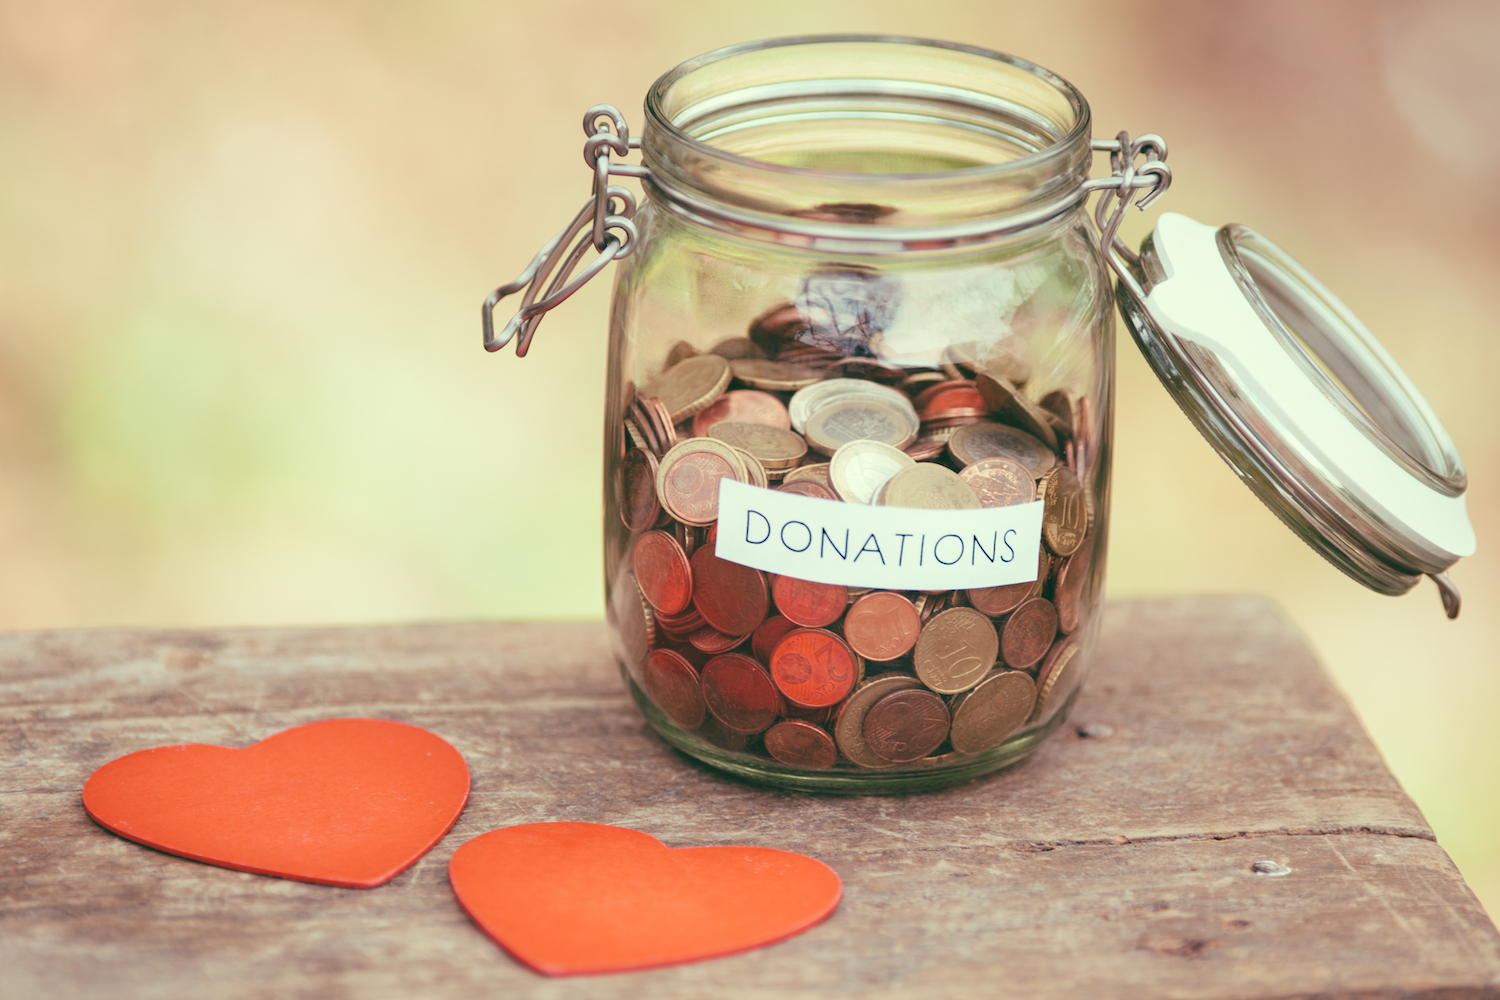 Chinese Ministry Taps Blockchain For Higher Visibility Of Charity Donations